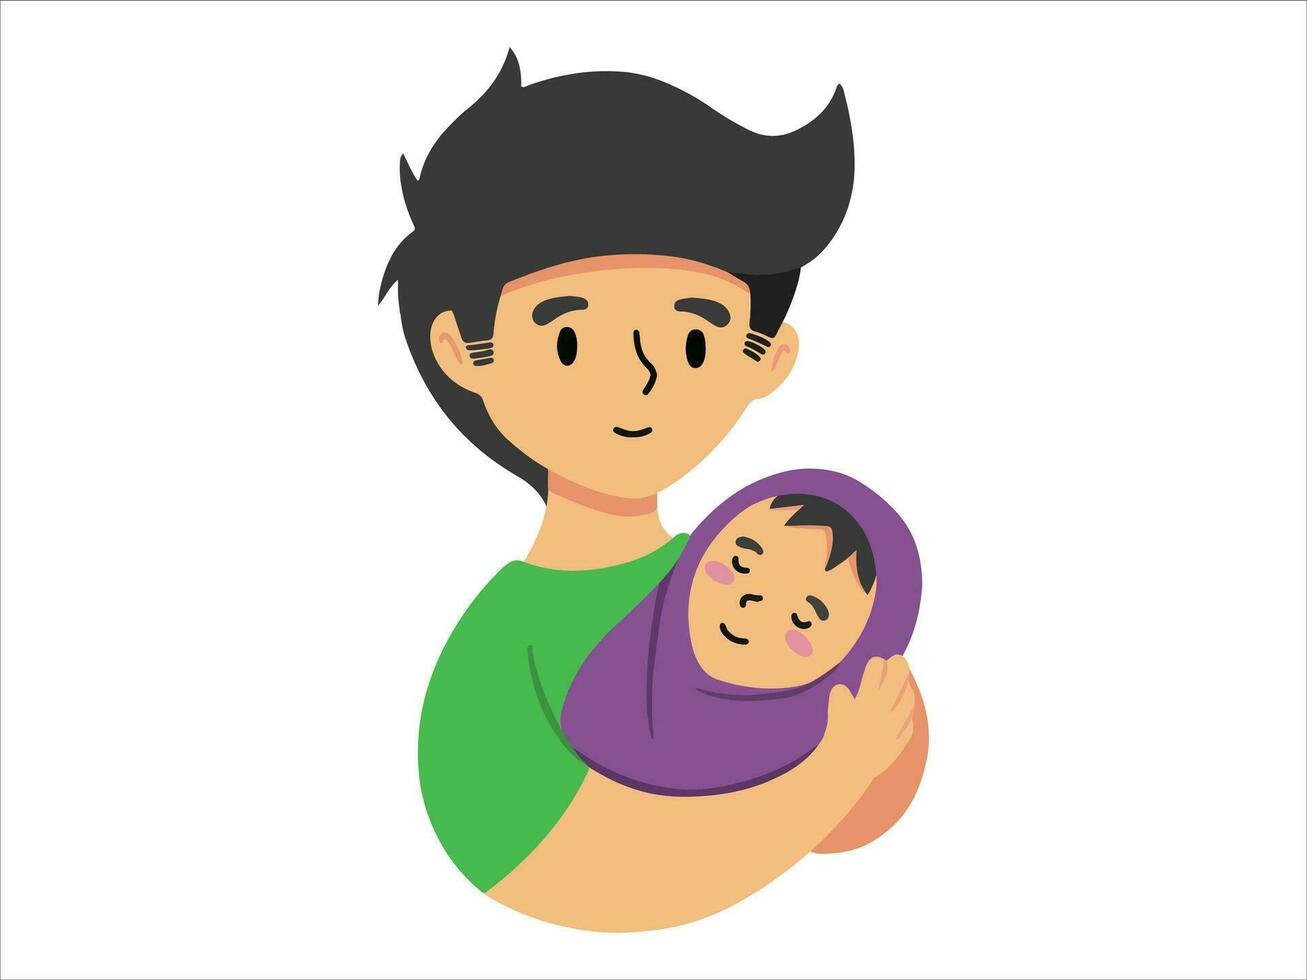 vader Holding baby of avatar icoon illustratie vector